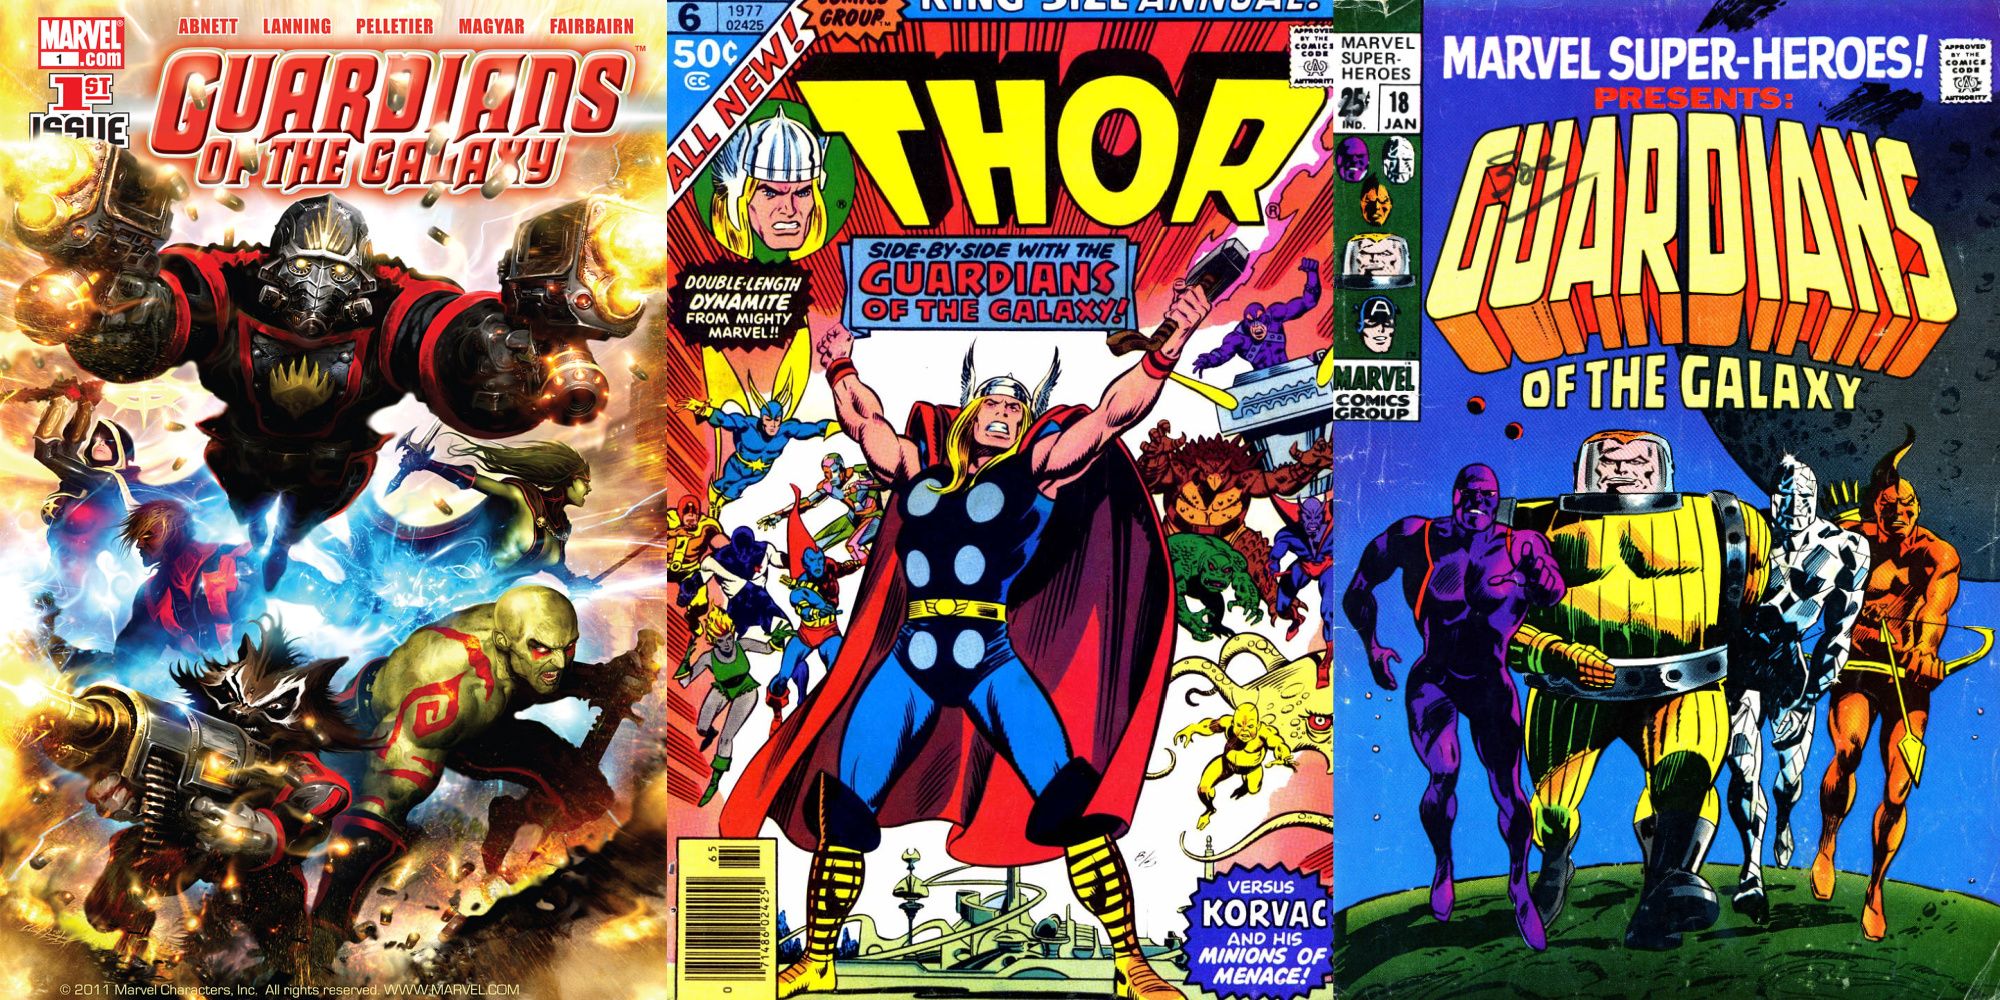 Split image of comic covers of Guardians of the Galaxy #1, Thor Annual #6, and Marvel Super-Heroes #18.